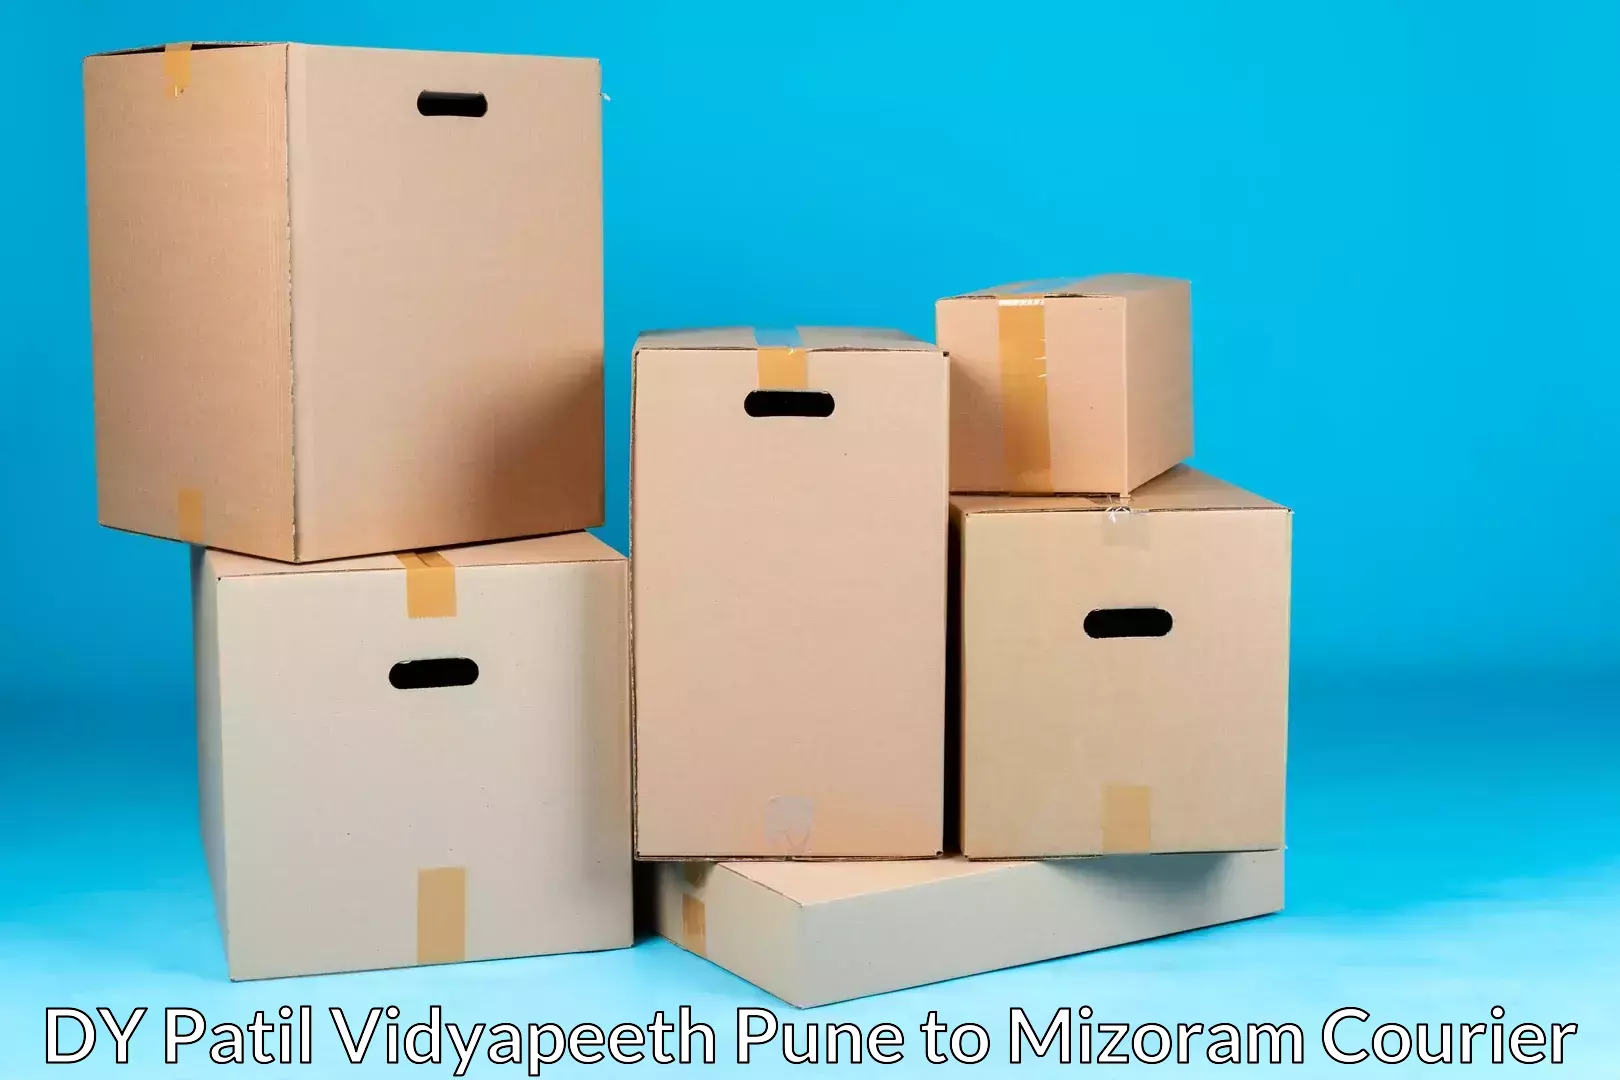 Furniture delivery service DY Patil Vidyapeeth Pune to Thenzawl